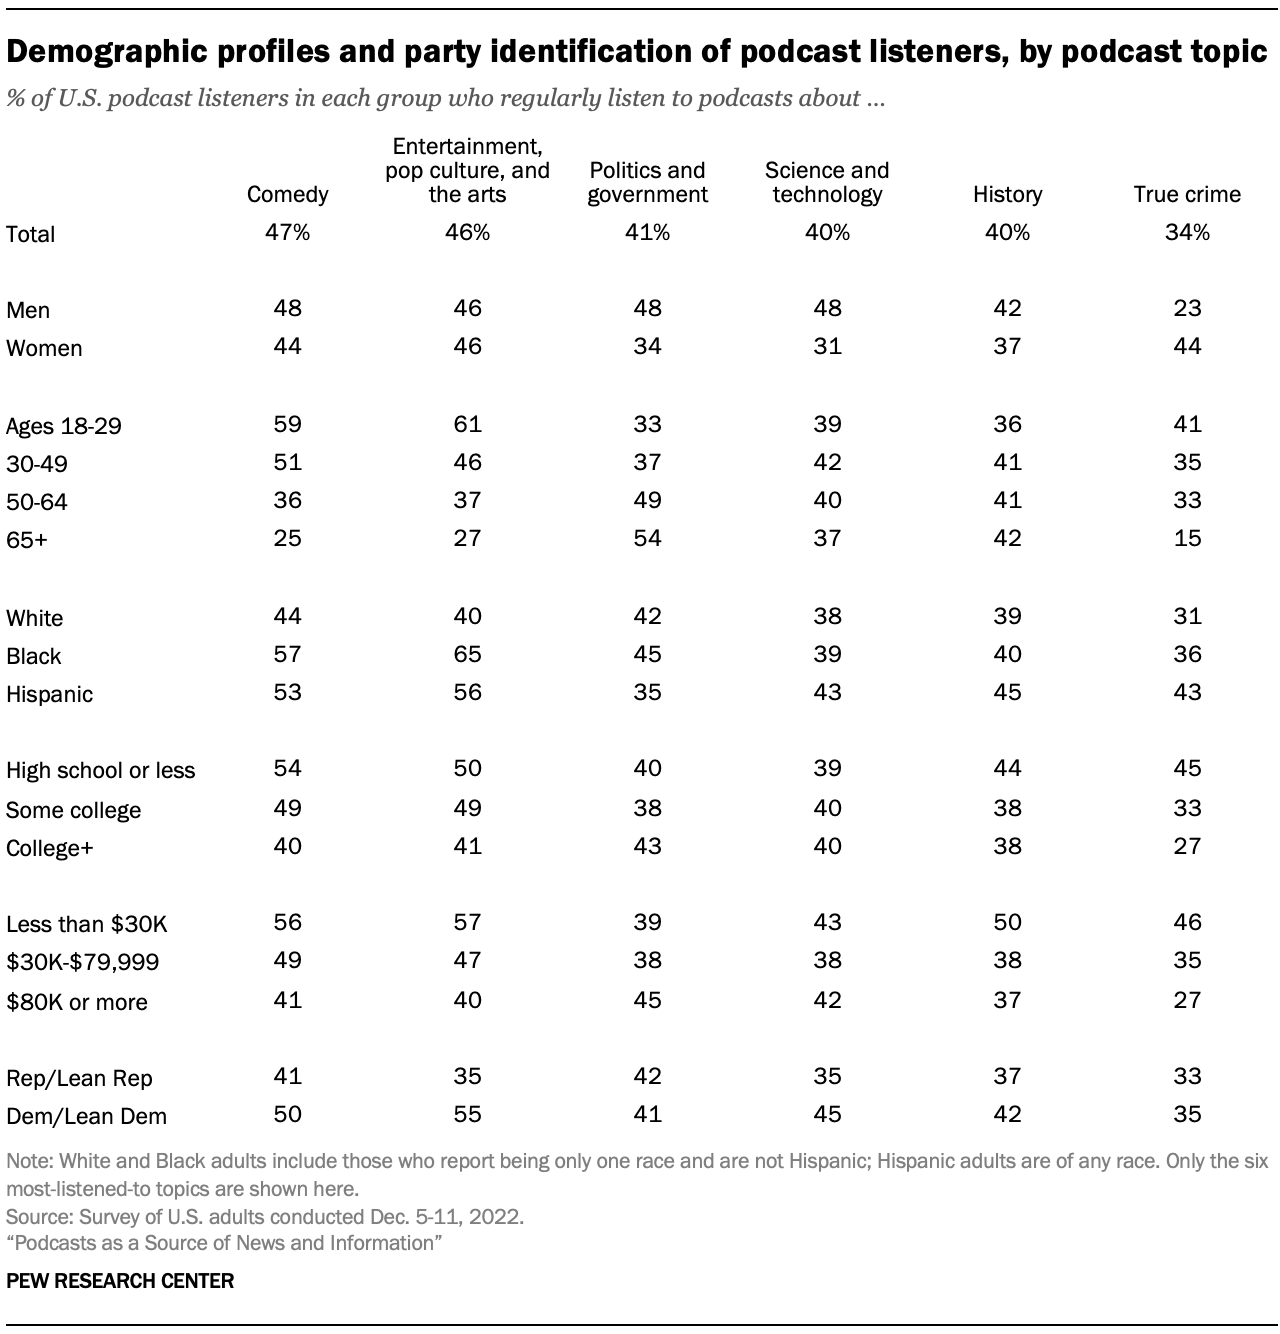 A table showing Demographic profiles and party identification of podcast listeners, by podcast topic